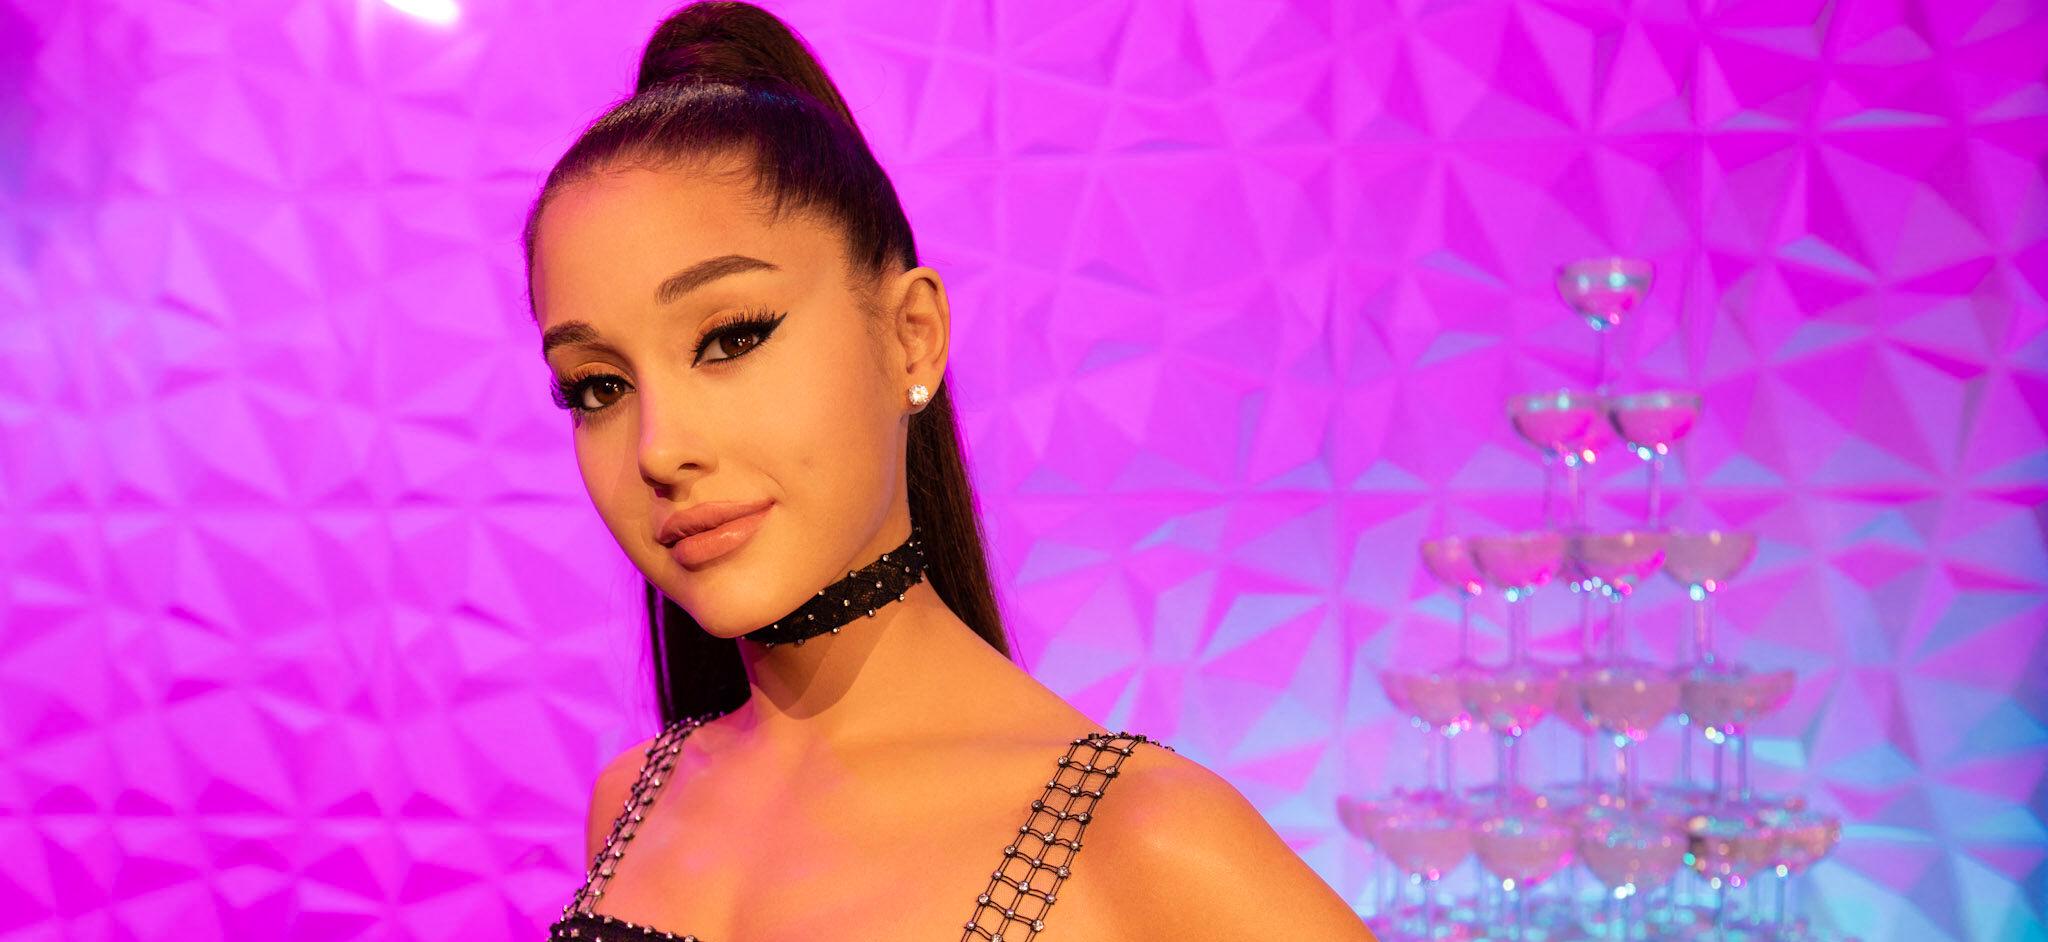 Seeing double Ariana Grande waxwork figure unveiled at Madame Tussauds Hollywood